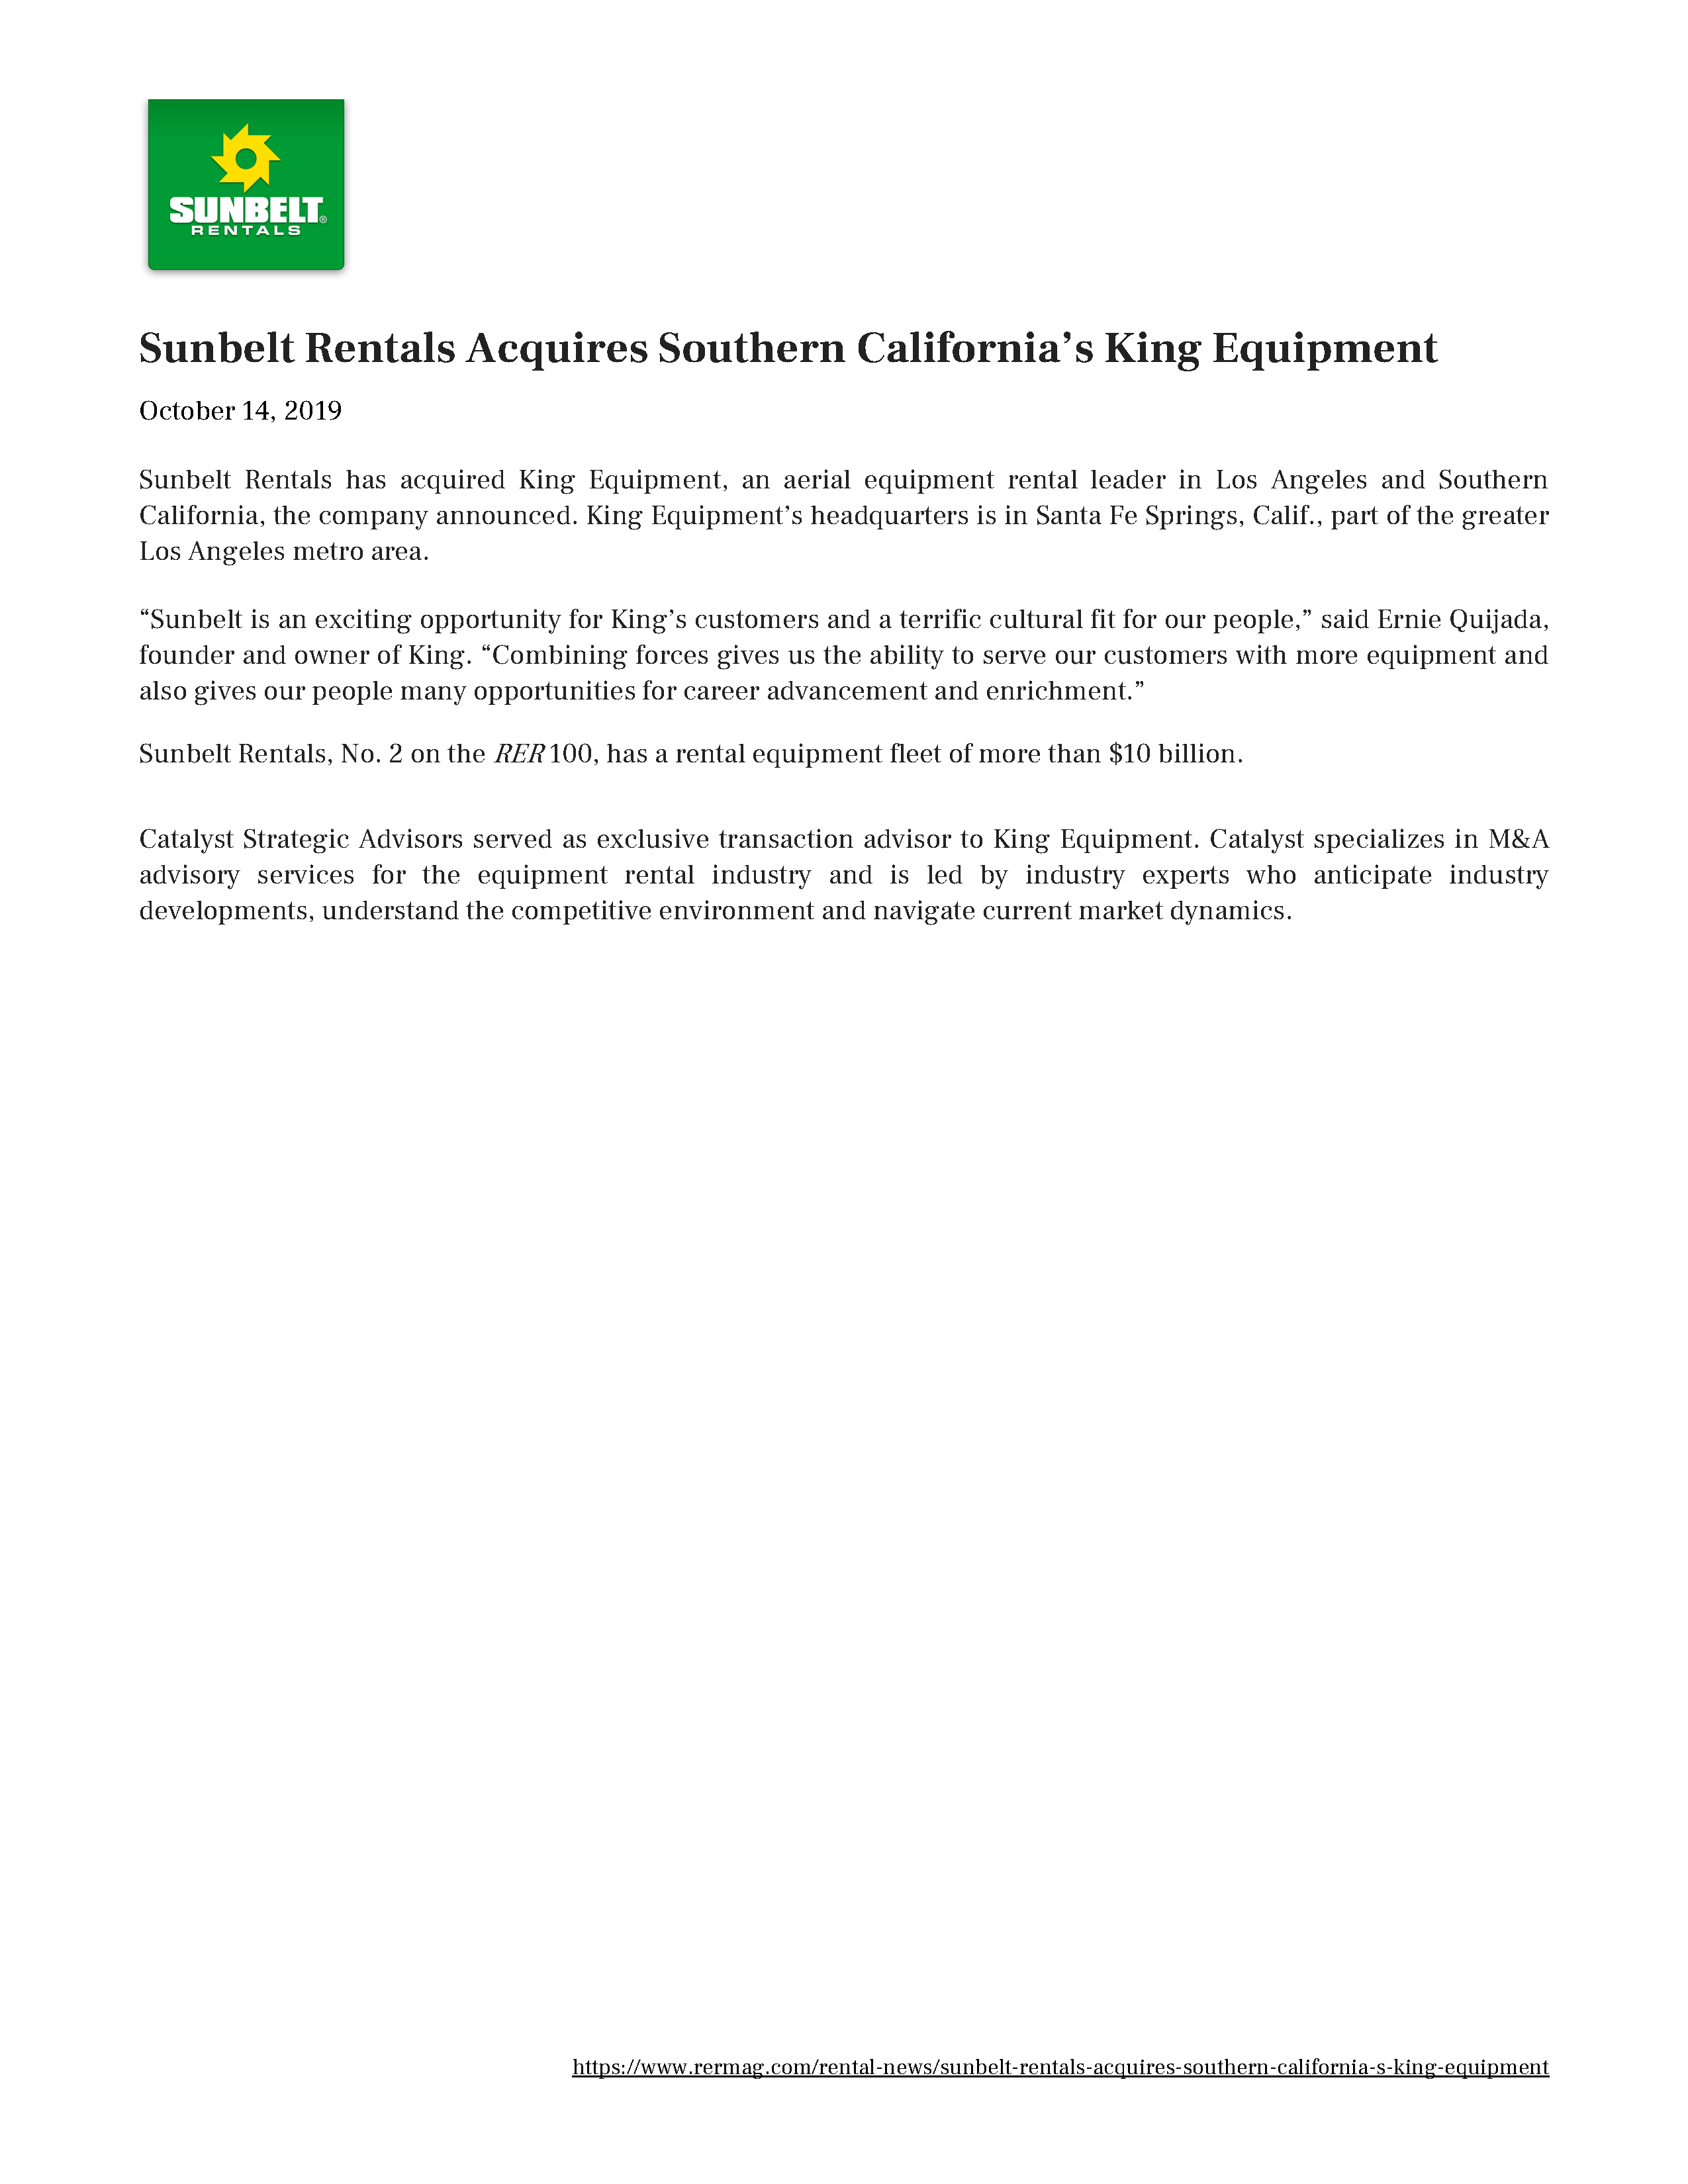 Sunbelt Rentals Acquires Southern California's King Equipment 10.14.2019